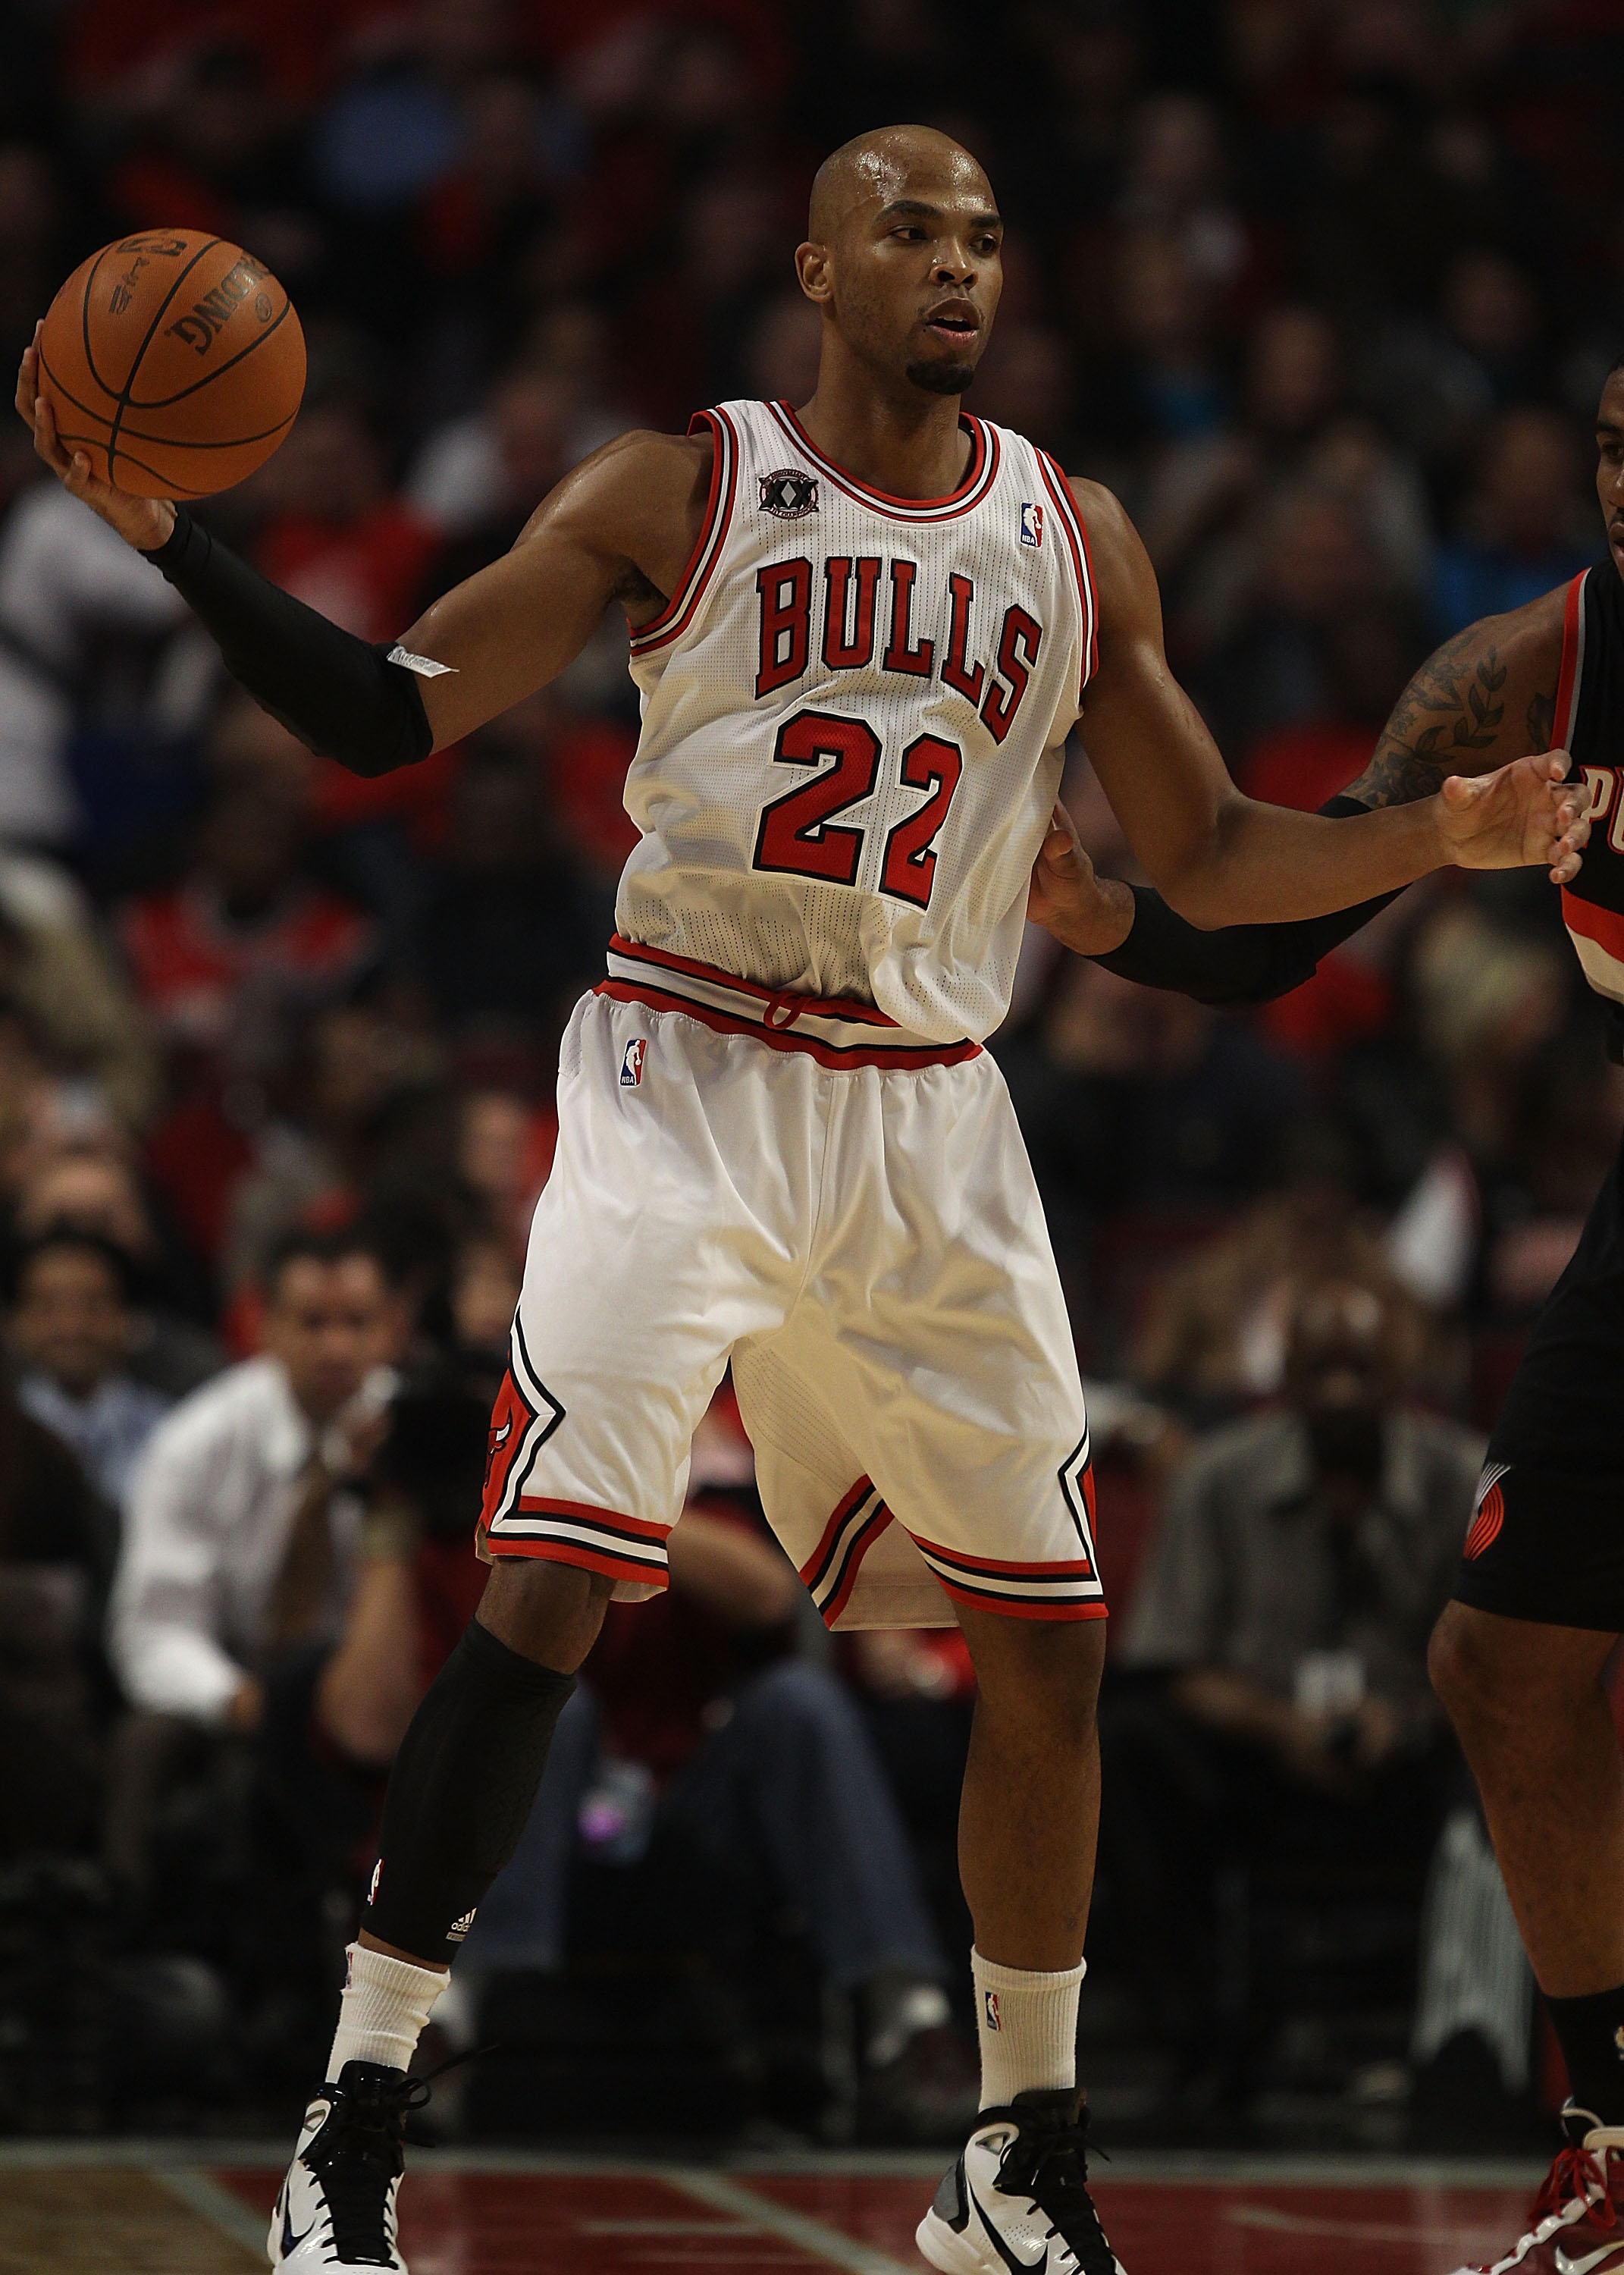 CHICAGO - NOVEMBER 01: Taj Gibson #22 of the Chicago Bulls looks to pass against the Portland Trail Blazers at the United Center on November 1, 2010 in Chicago, Illinois. The Bulls defeated the Trail Blazers 110-98. NOTE TO USER: User expressly acknowledg